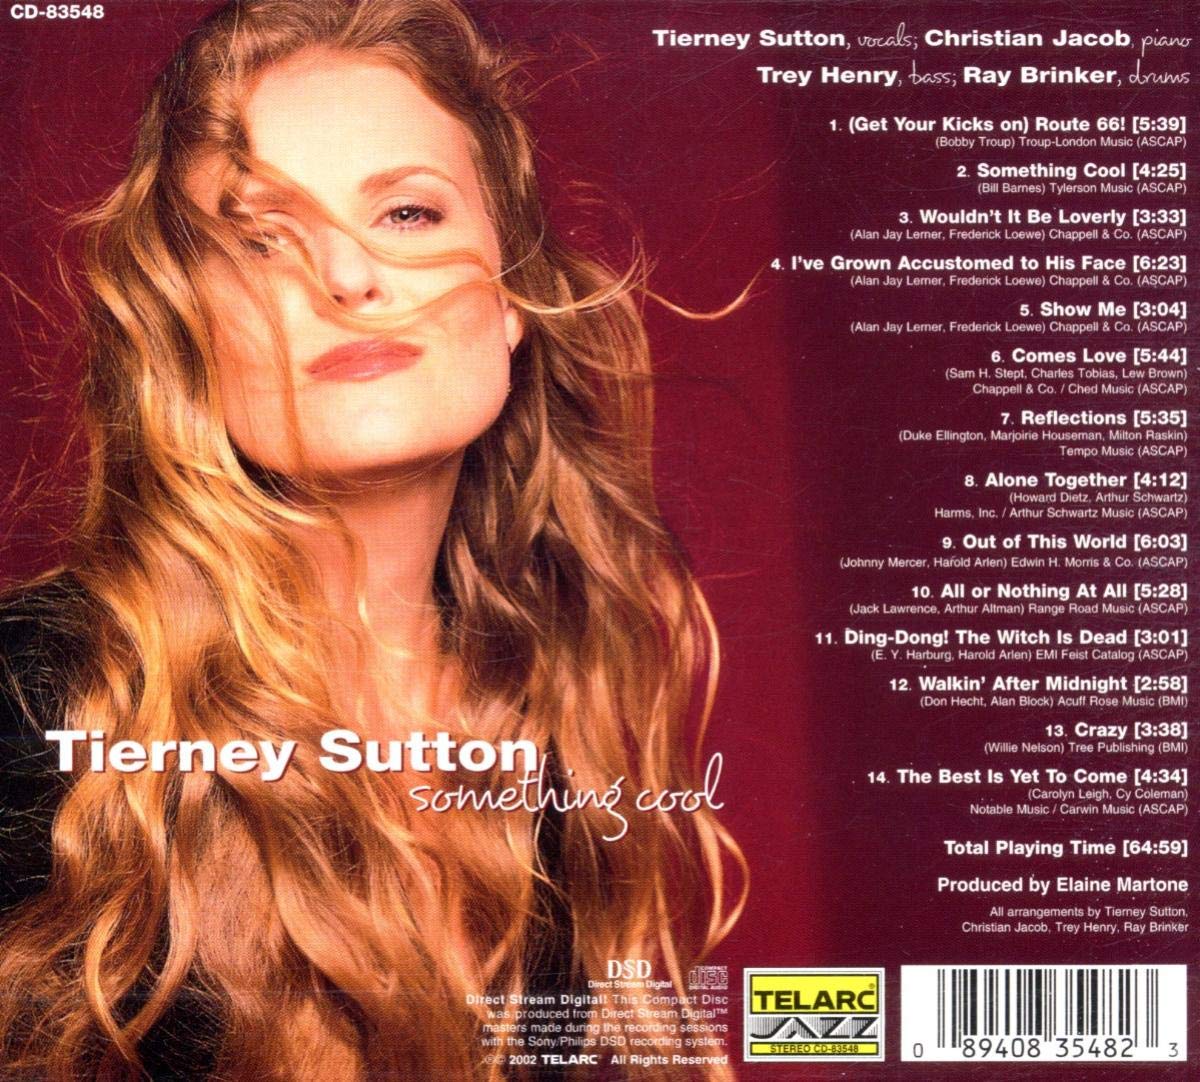 TIERNEY SUTTON: SOMETHING COOL